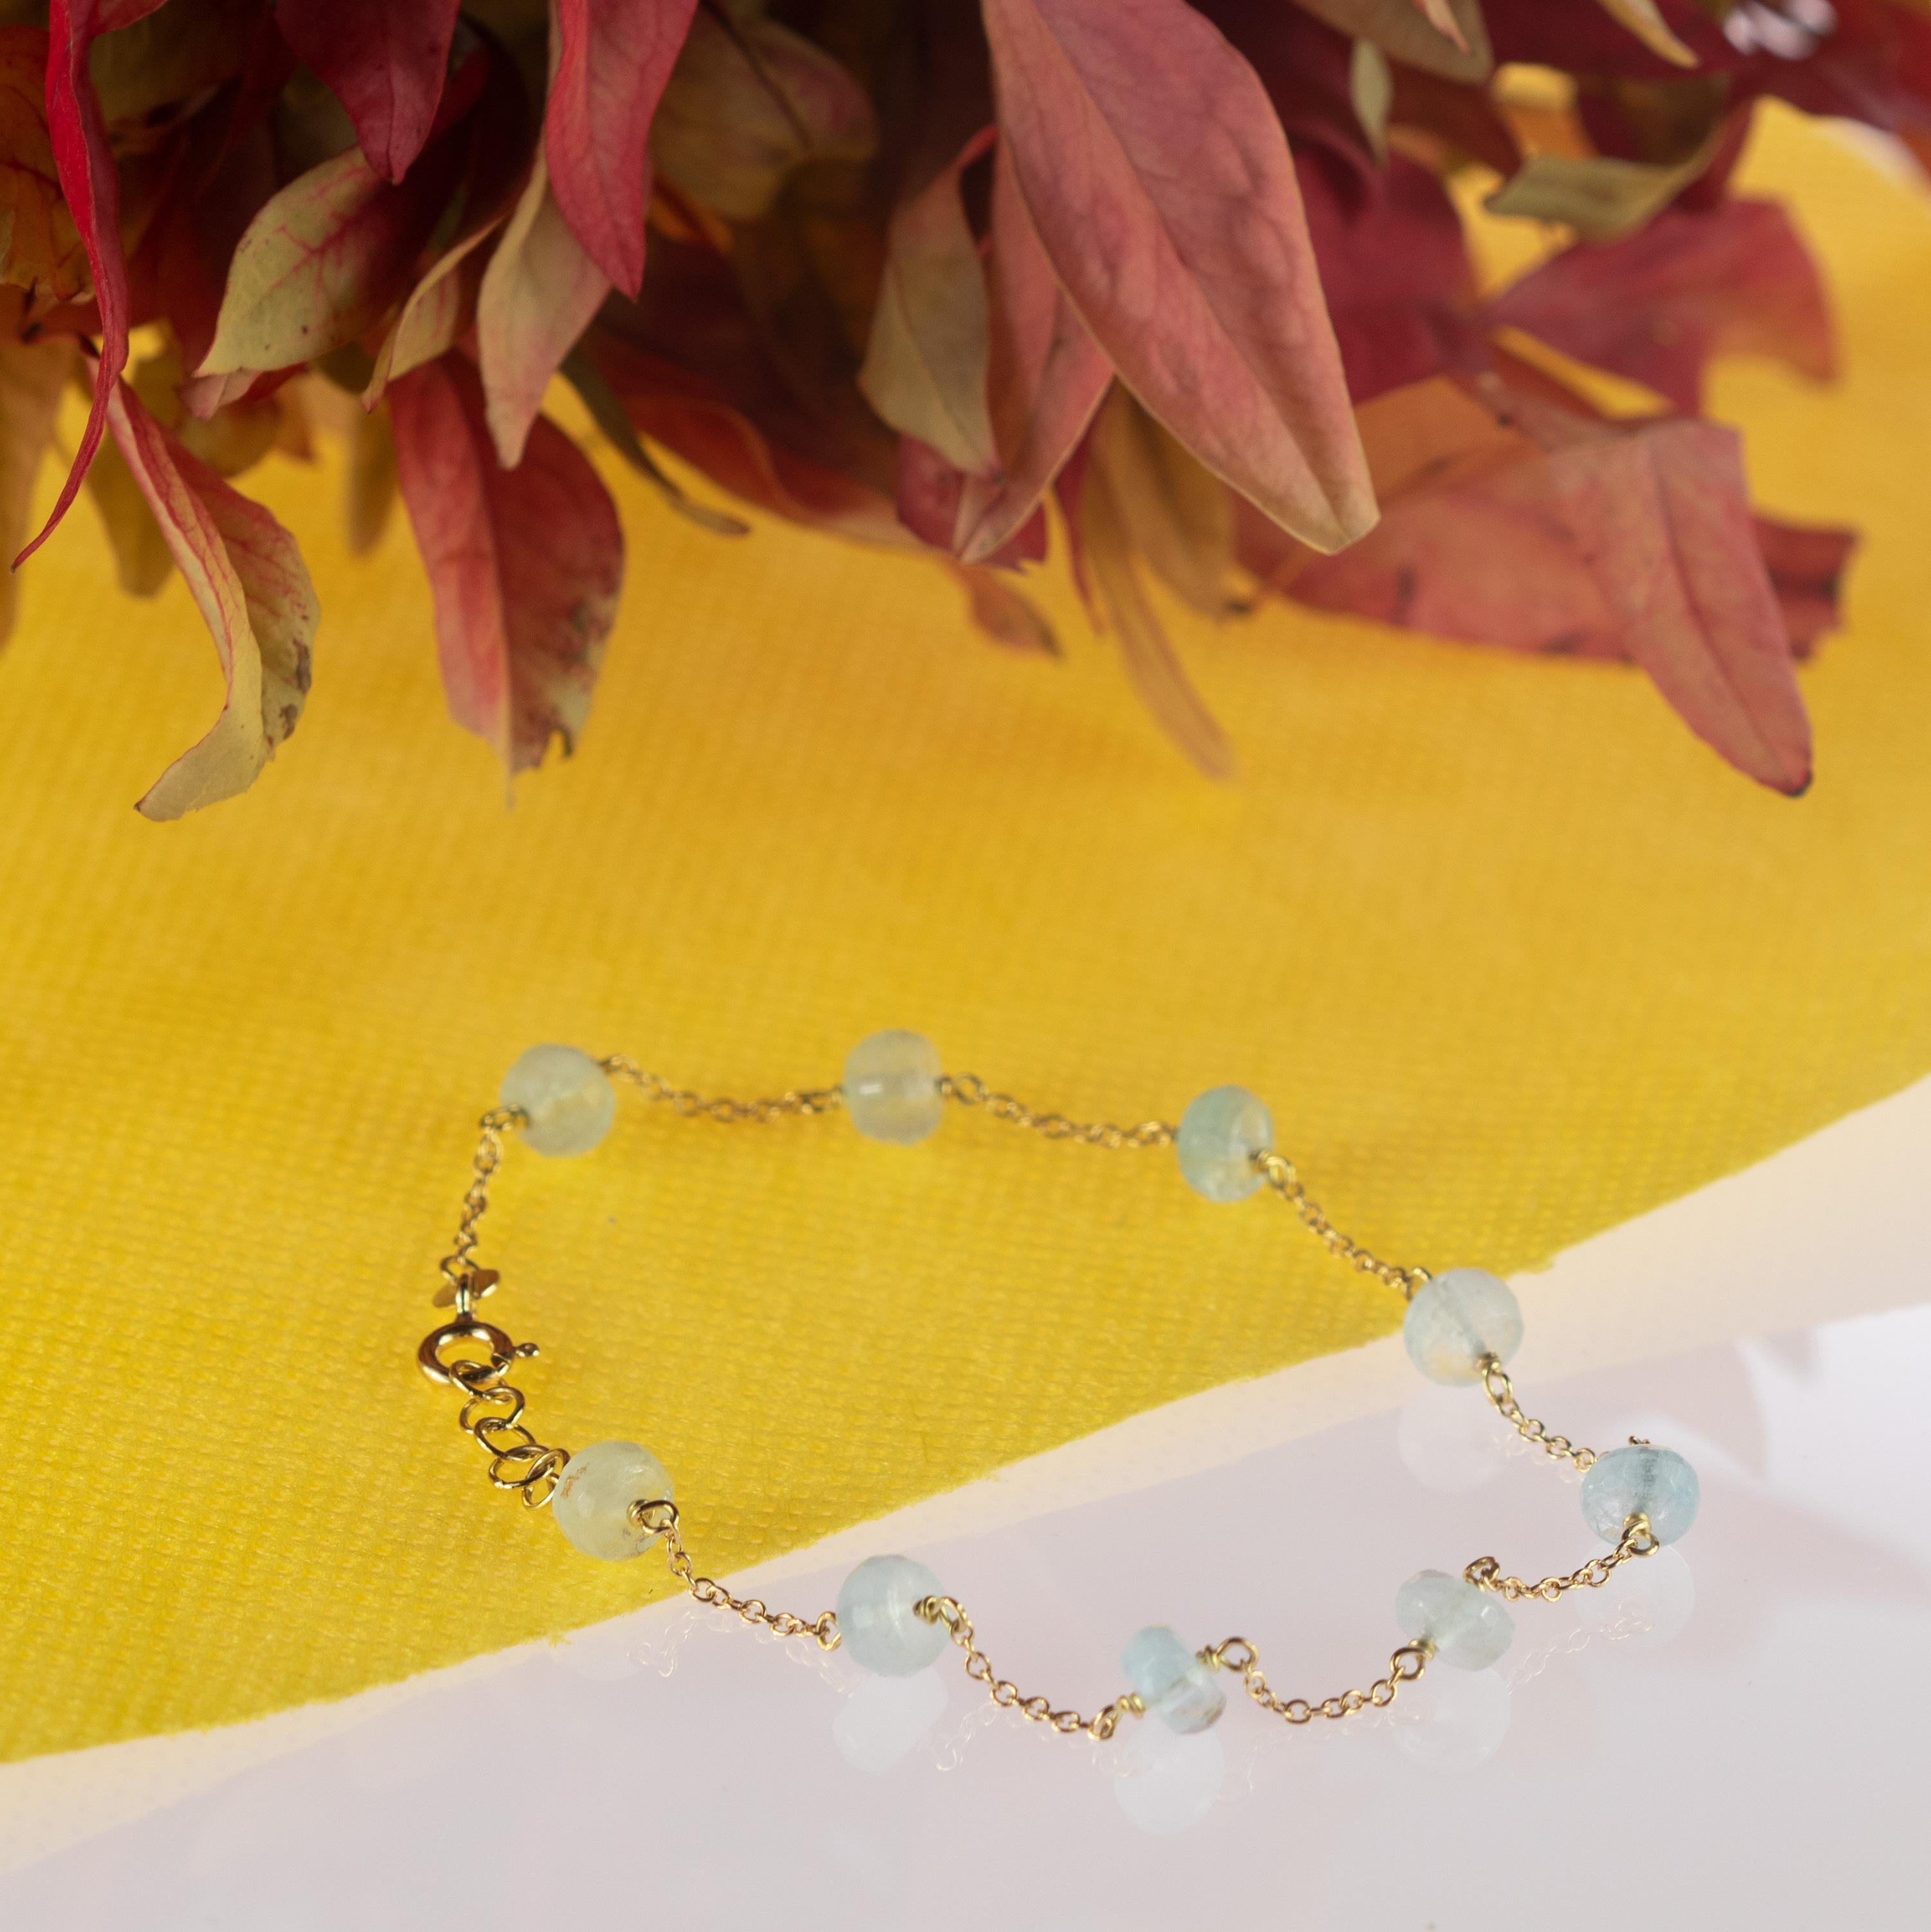 Intini Jewels signature quality on a modern and contemporary design jewel. Nine gems of top quality of aquamarine embellish a delicate 9 karat yellow gold chain bracelet.

An elegant touch of glamour at your fingertips. Let yourself be tempted by a